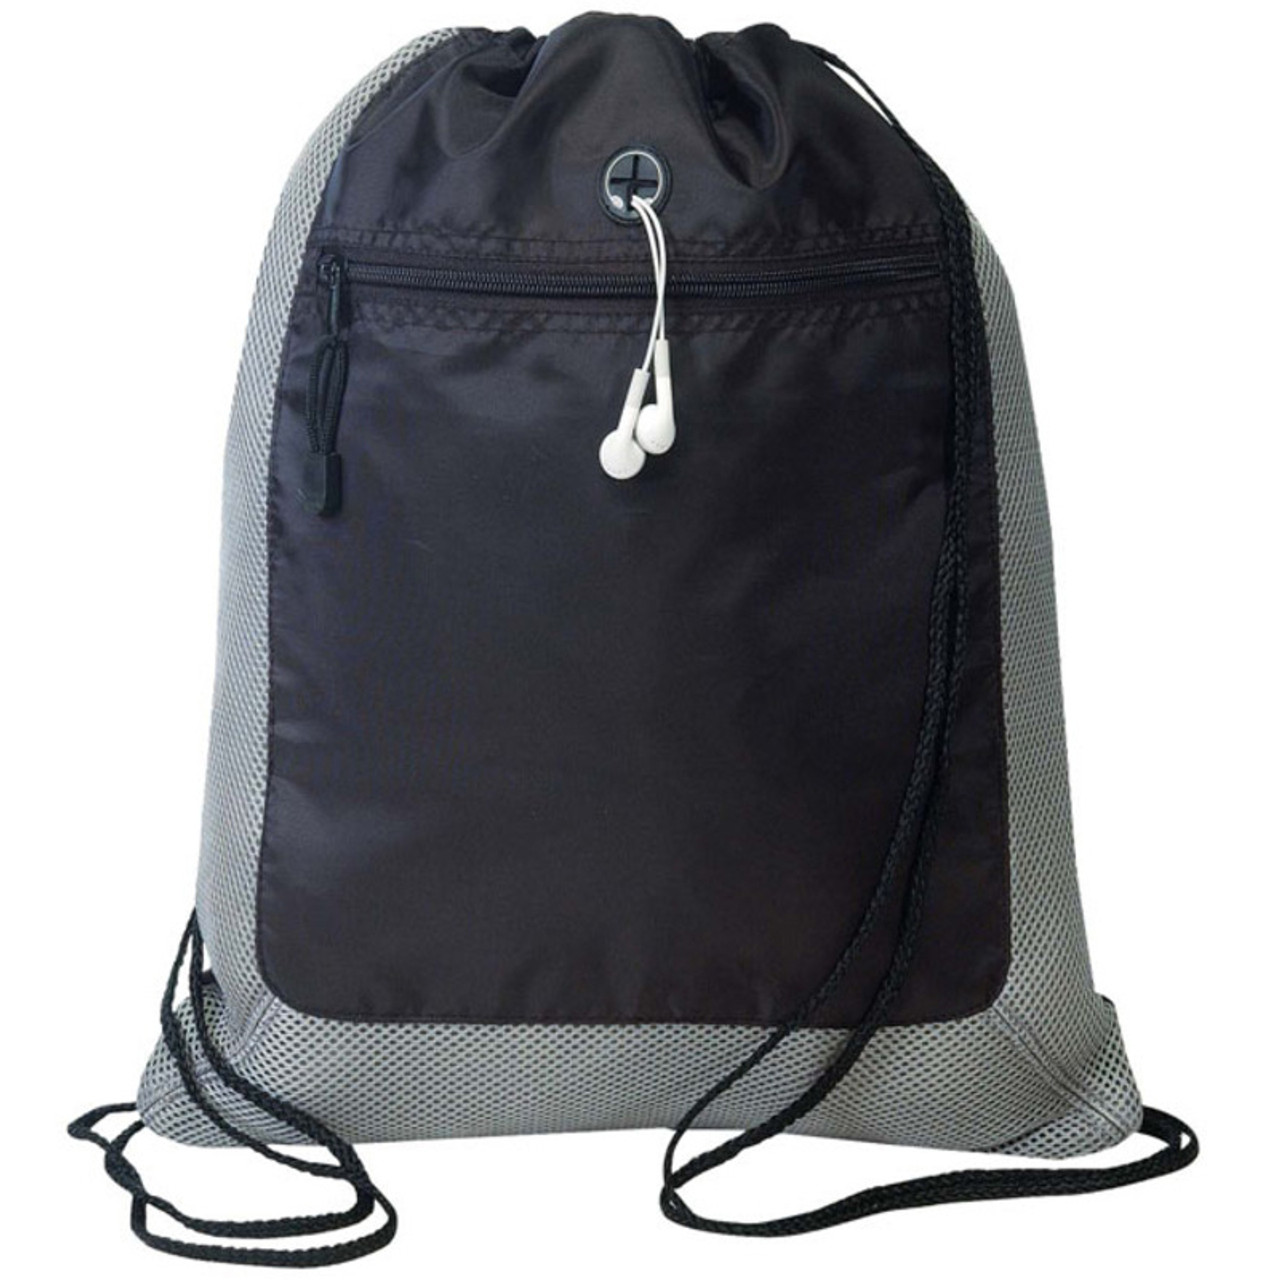 Wholesale Sturdy Polyester Drawstring Bags with Front Zipper Pocket